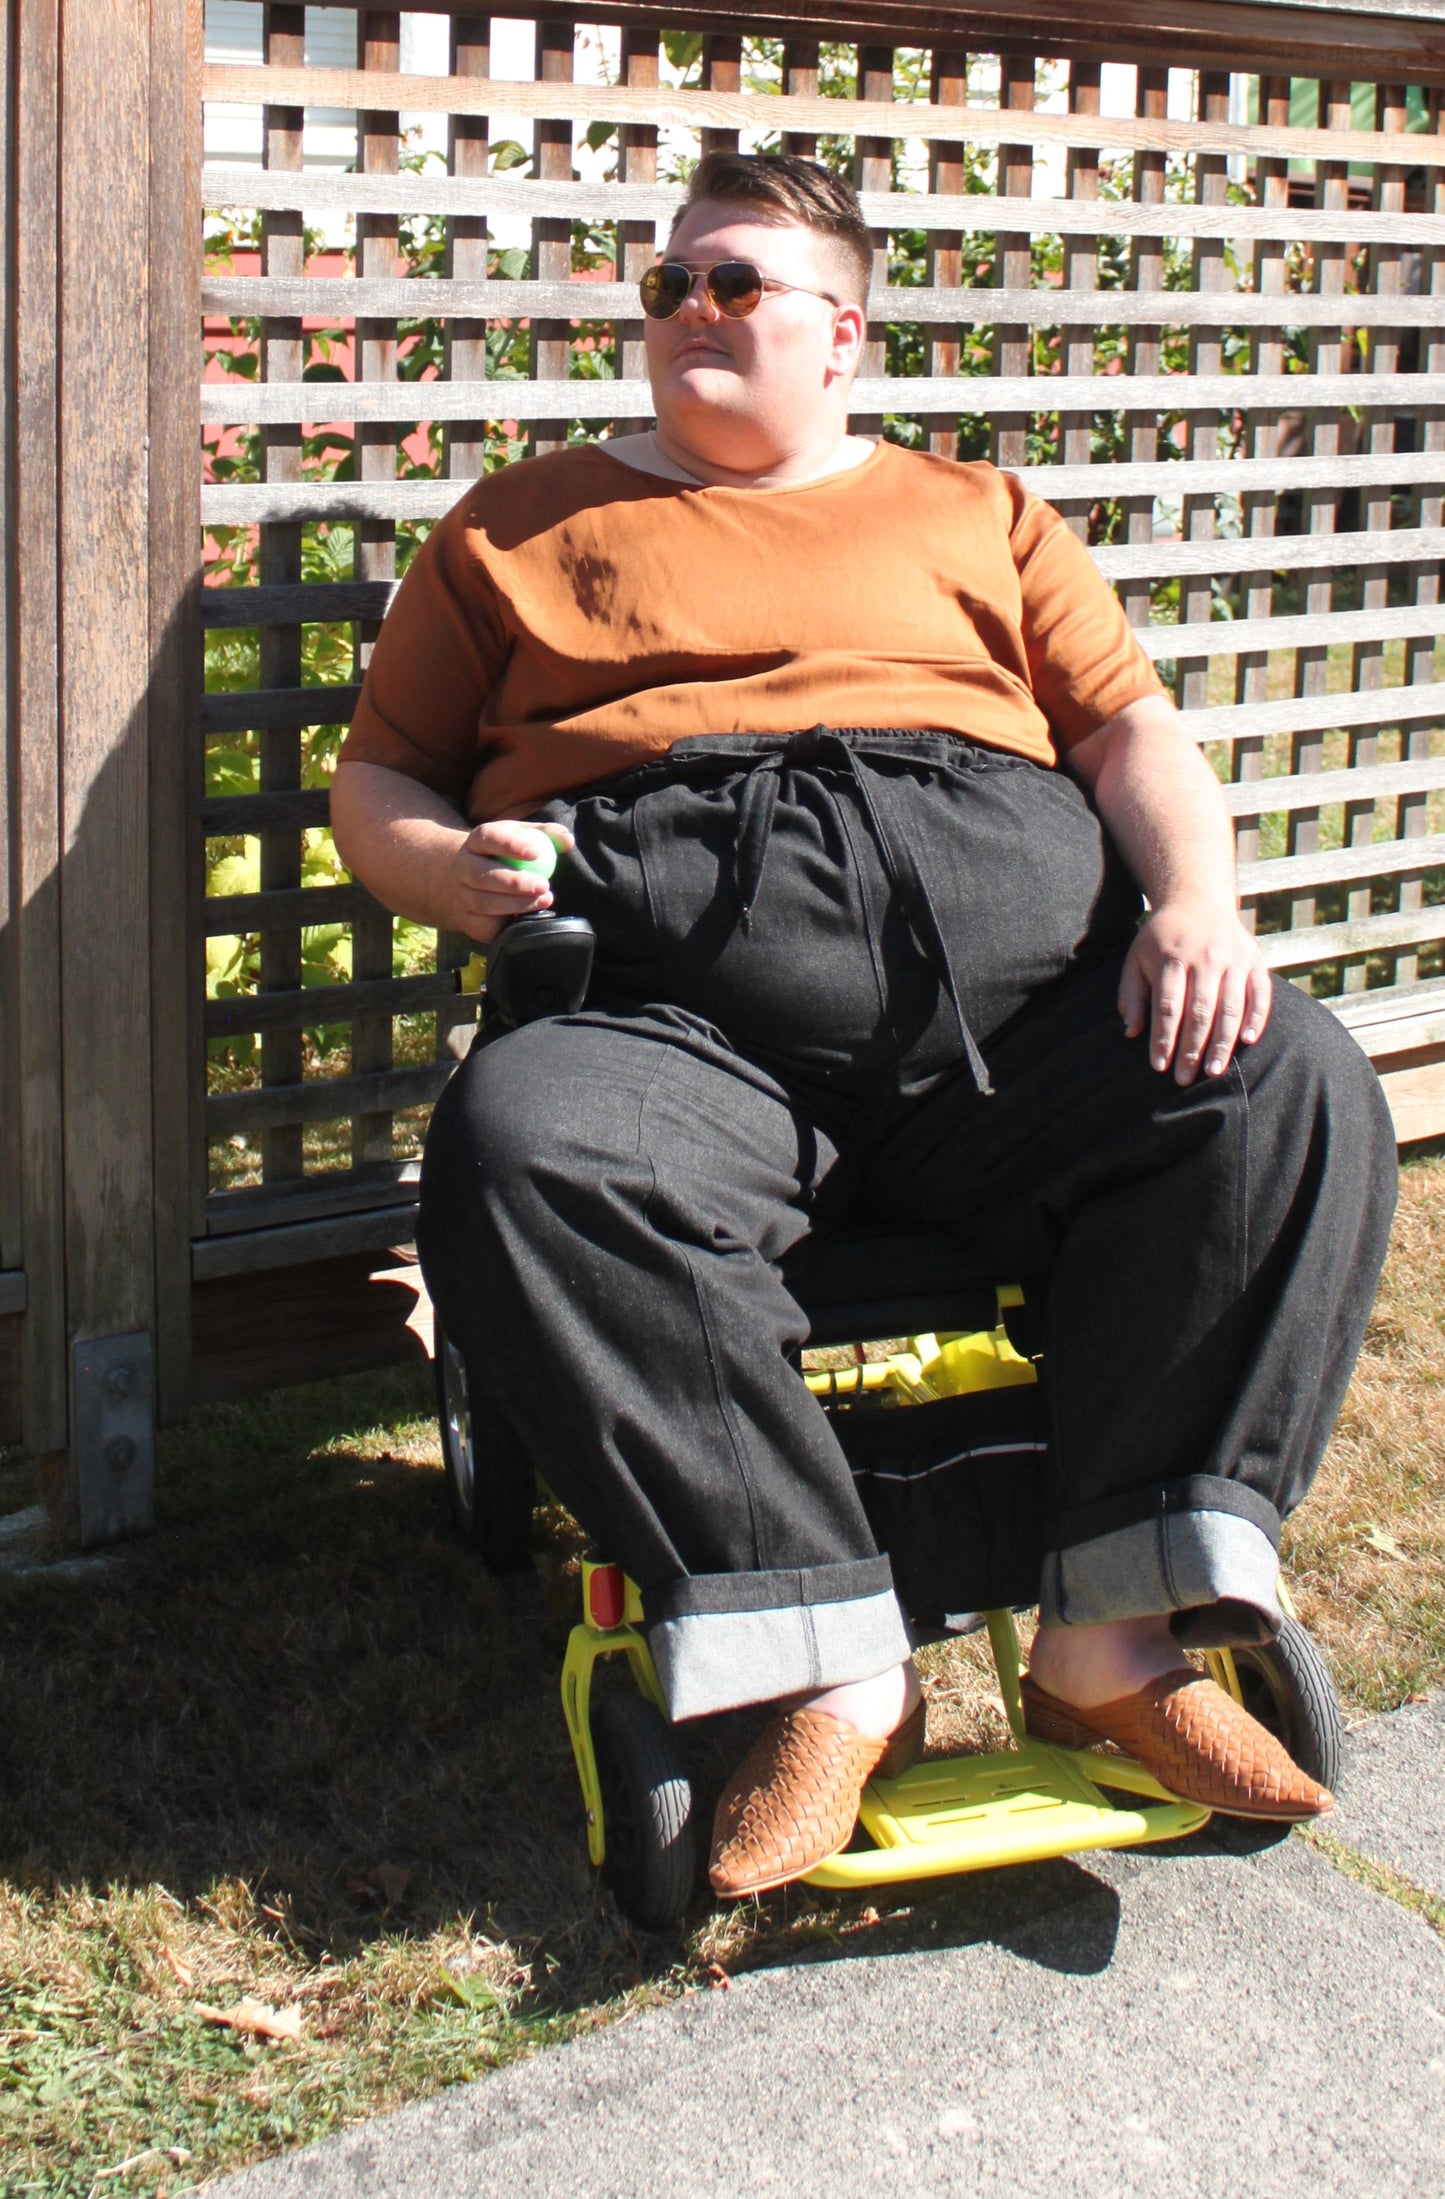 Robin Roscoe models the Cedar gender neutral T shirt tucked into a pair of raw denim trousers while seated.